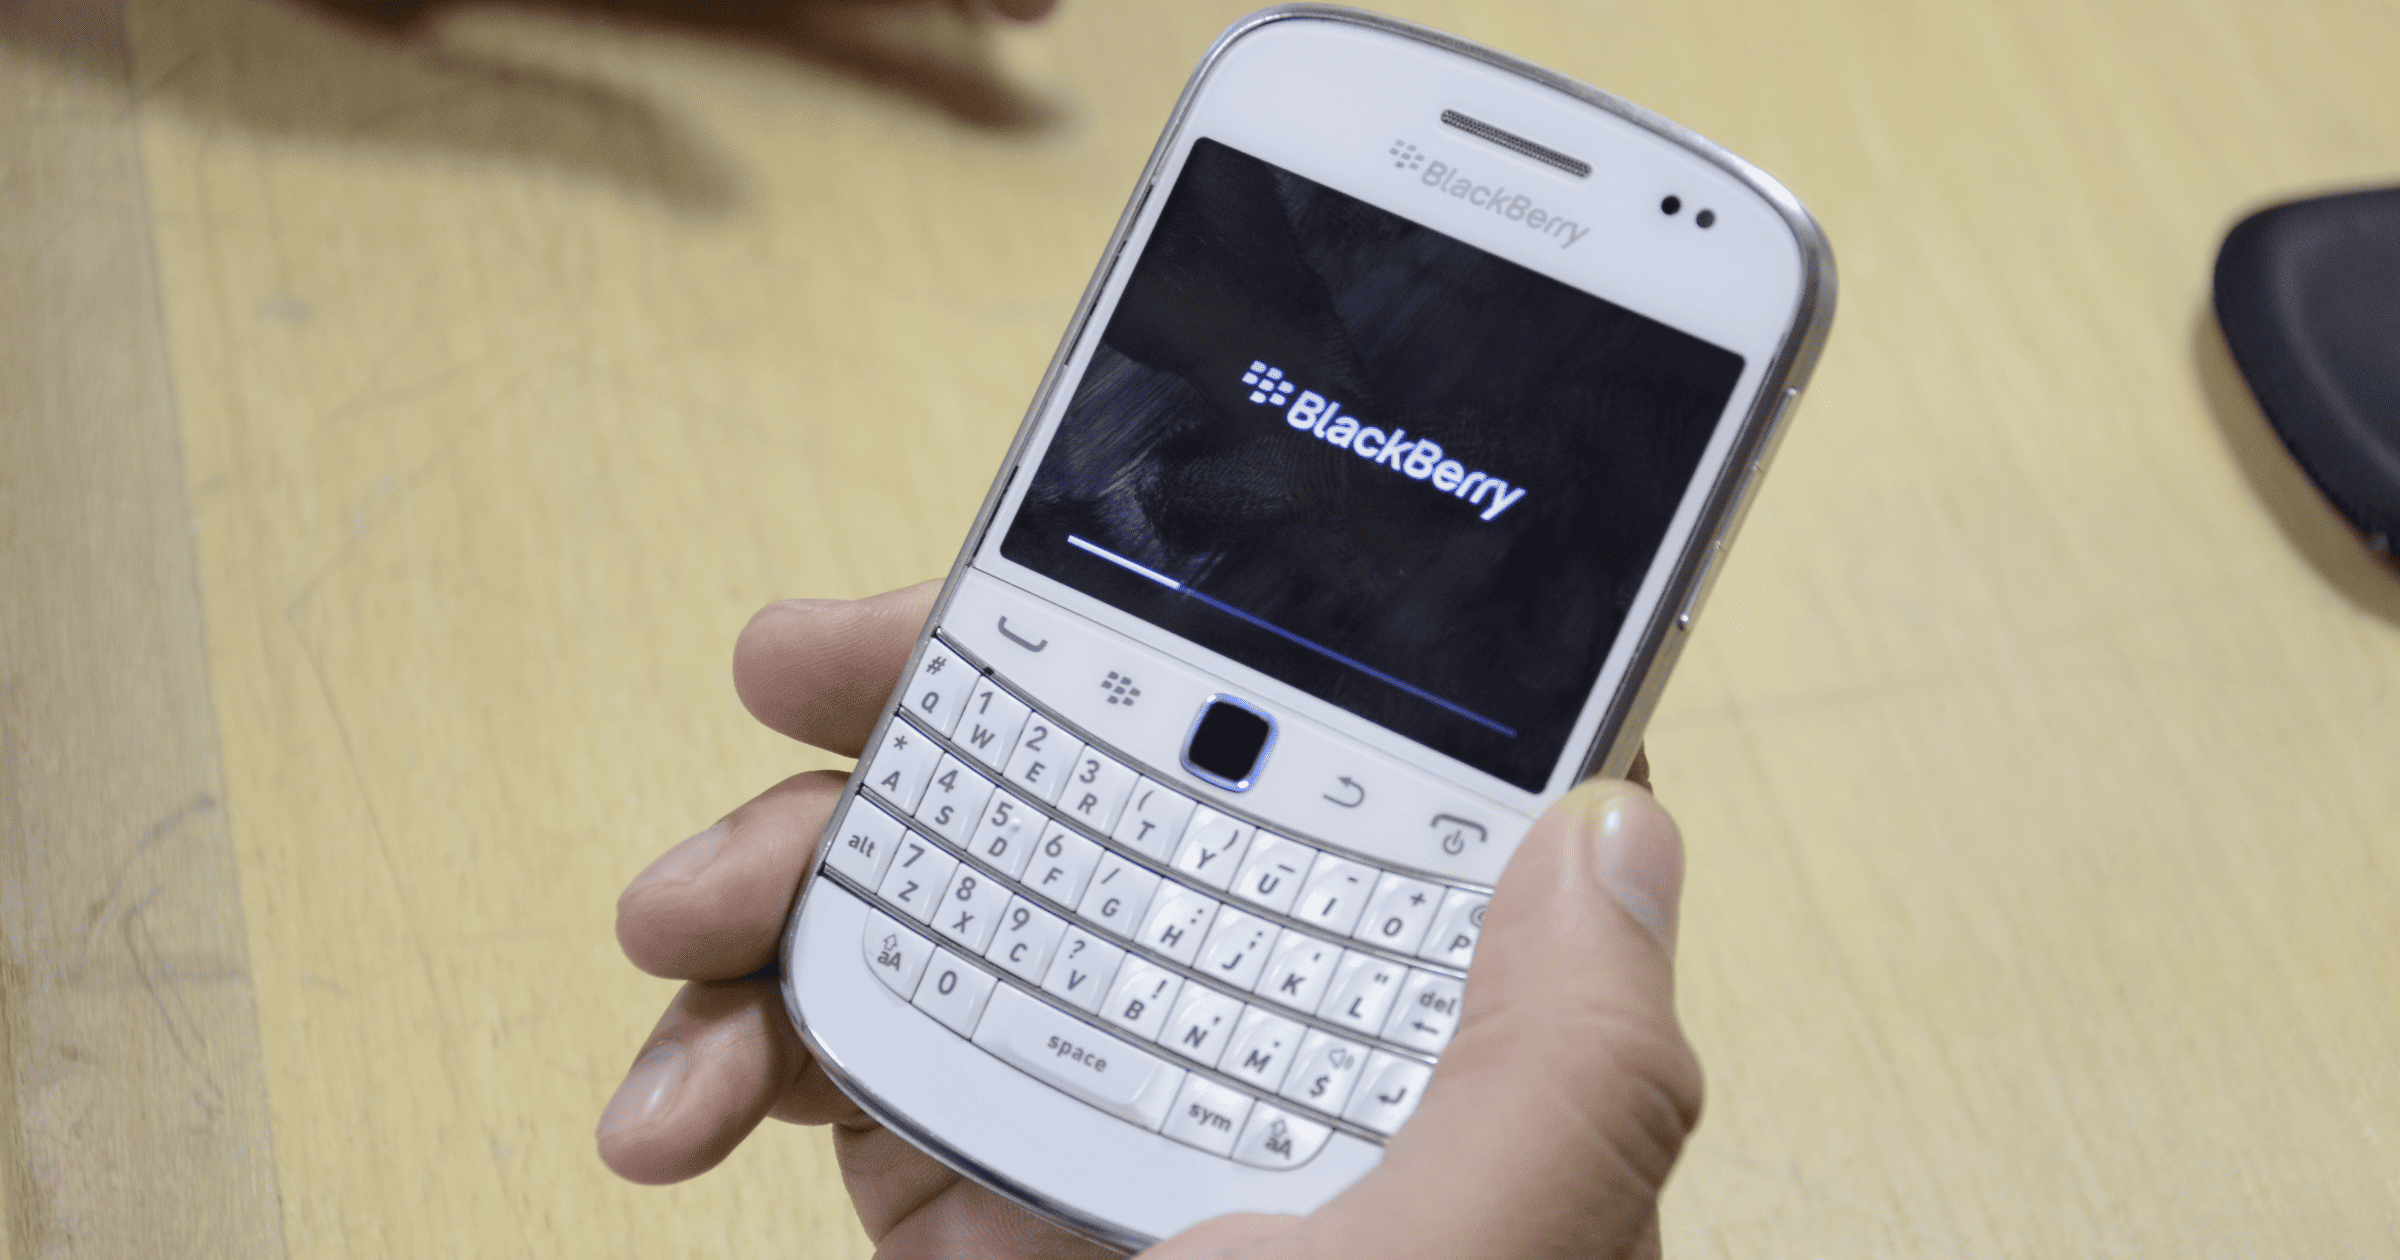 Support For BlackBerry Comes to an End